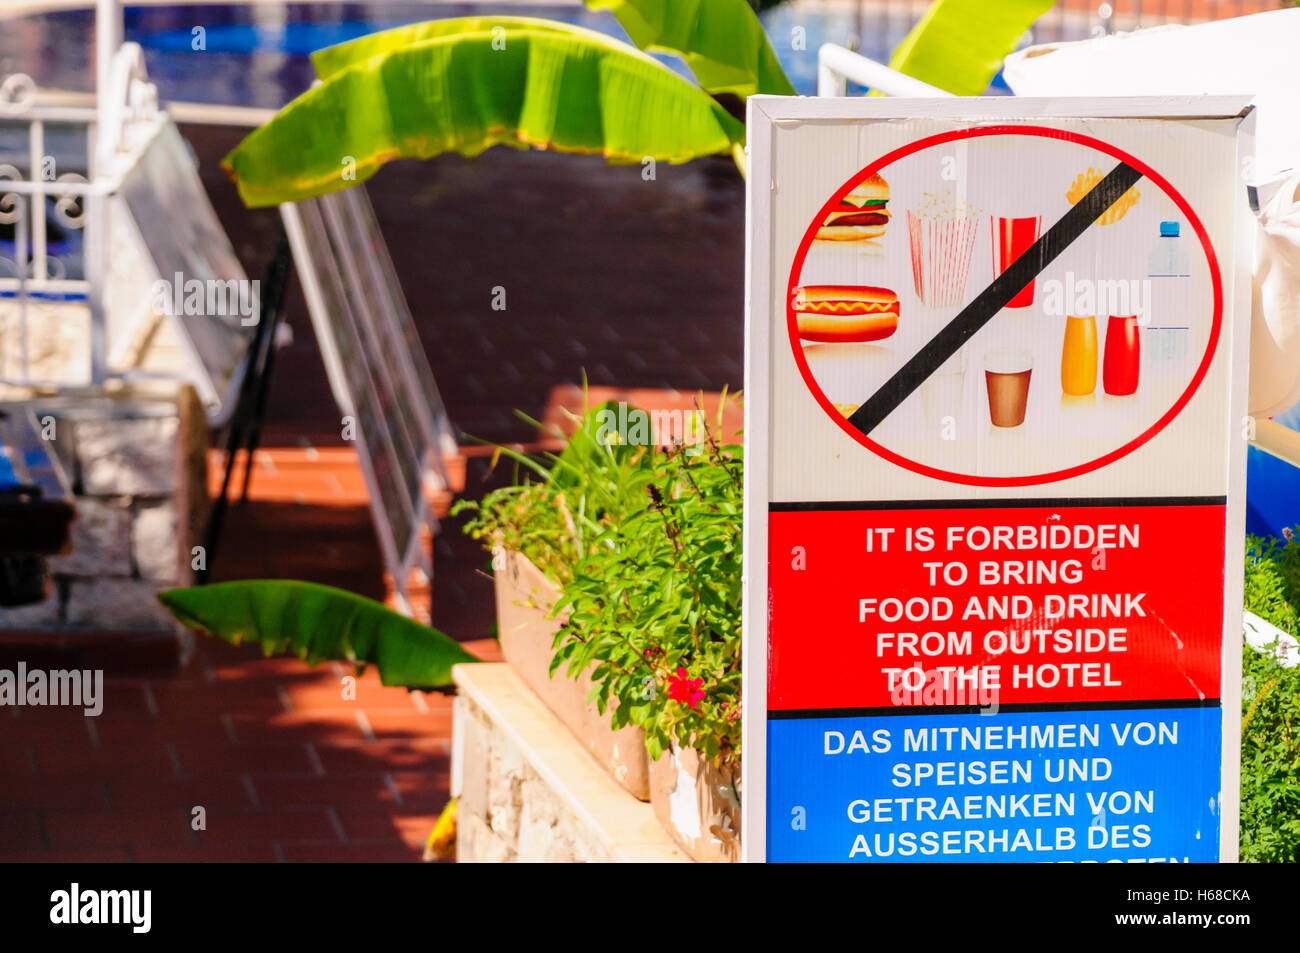 Sign at the entrance of a hotel warning guests not to bring in food and drink from outside. Stock Photo